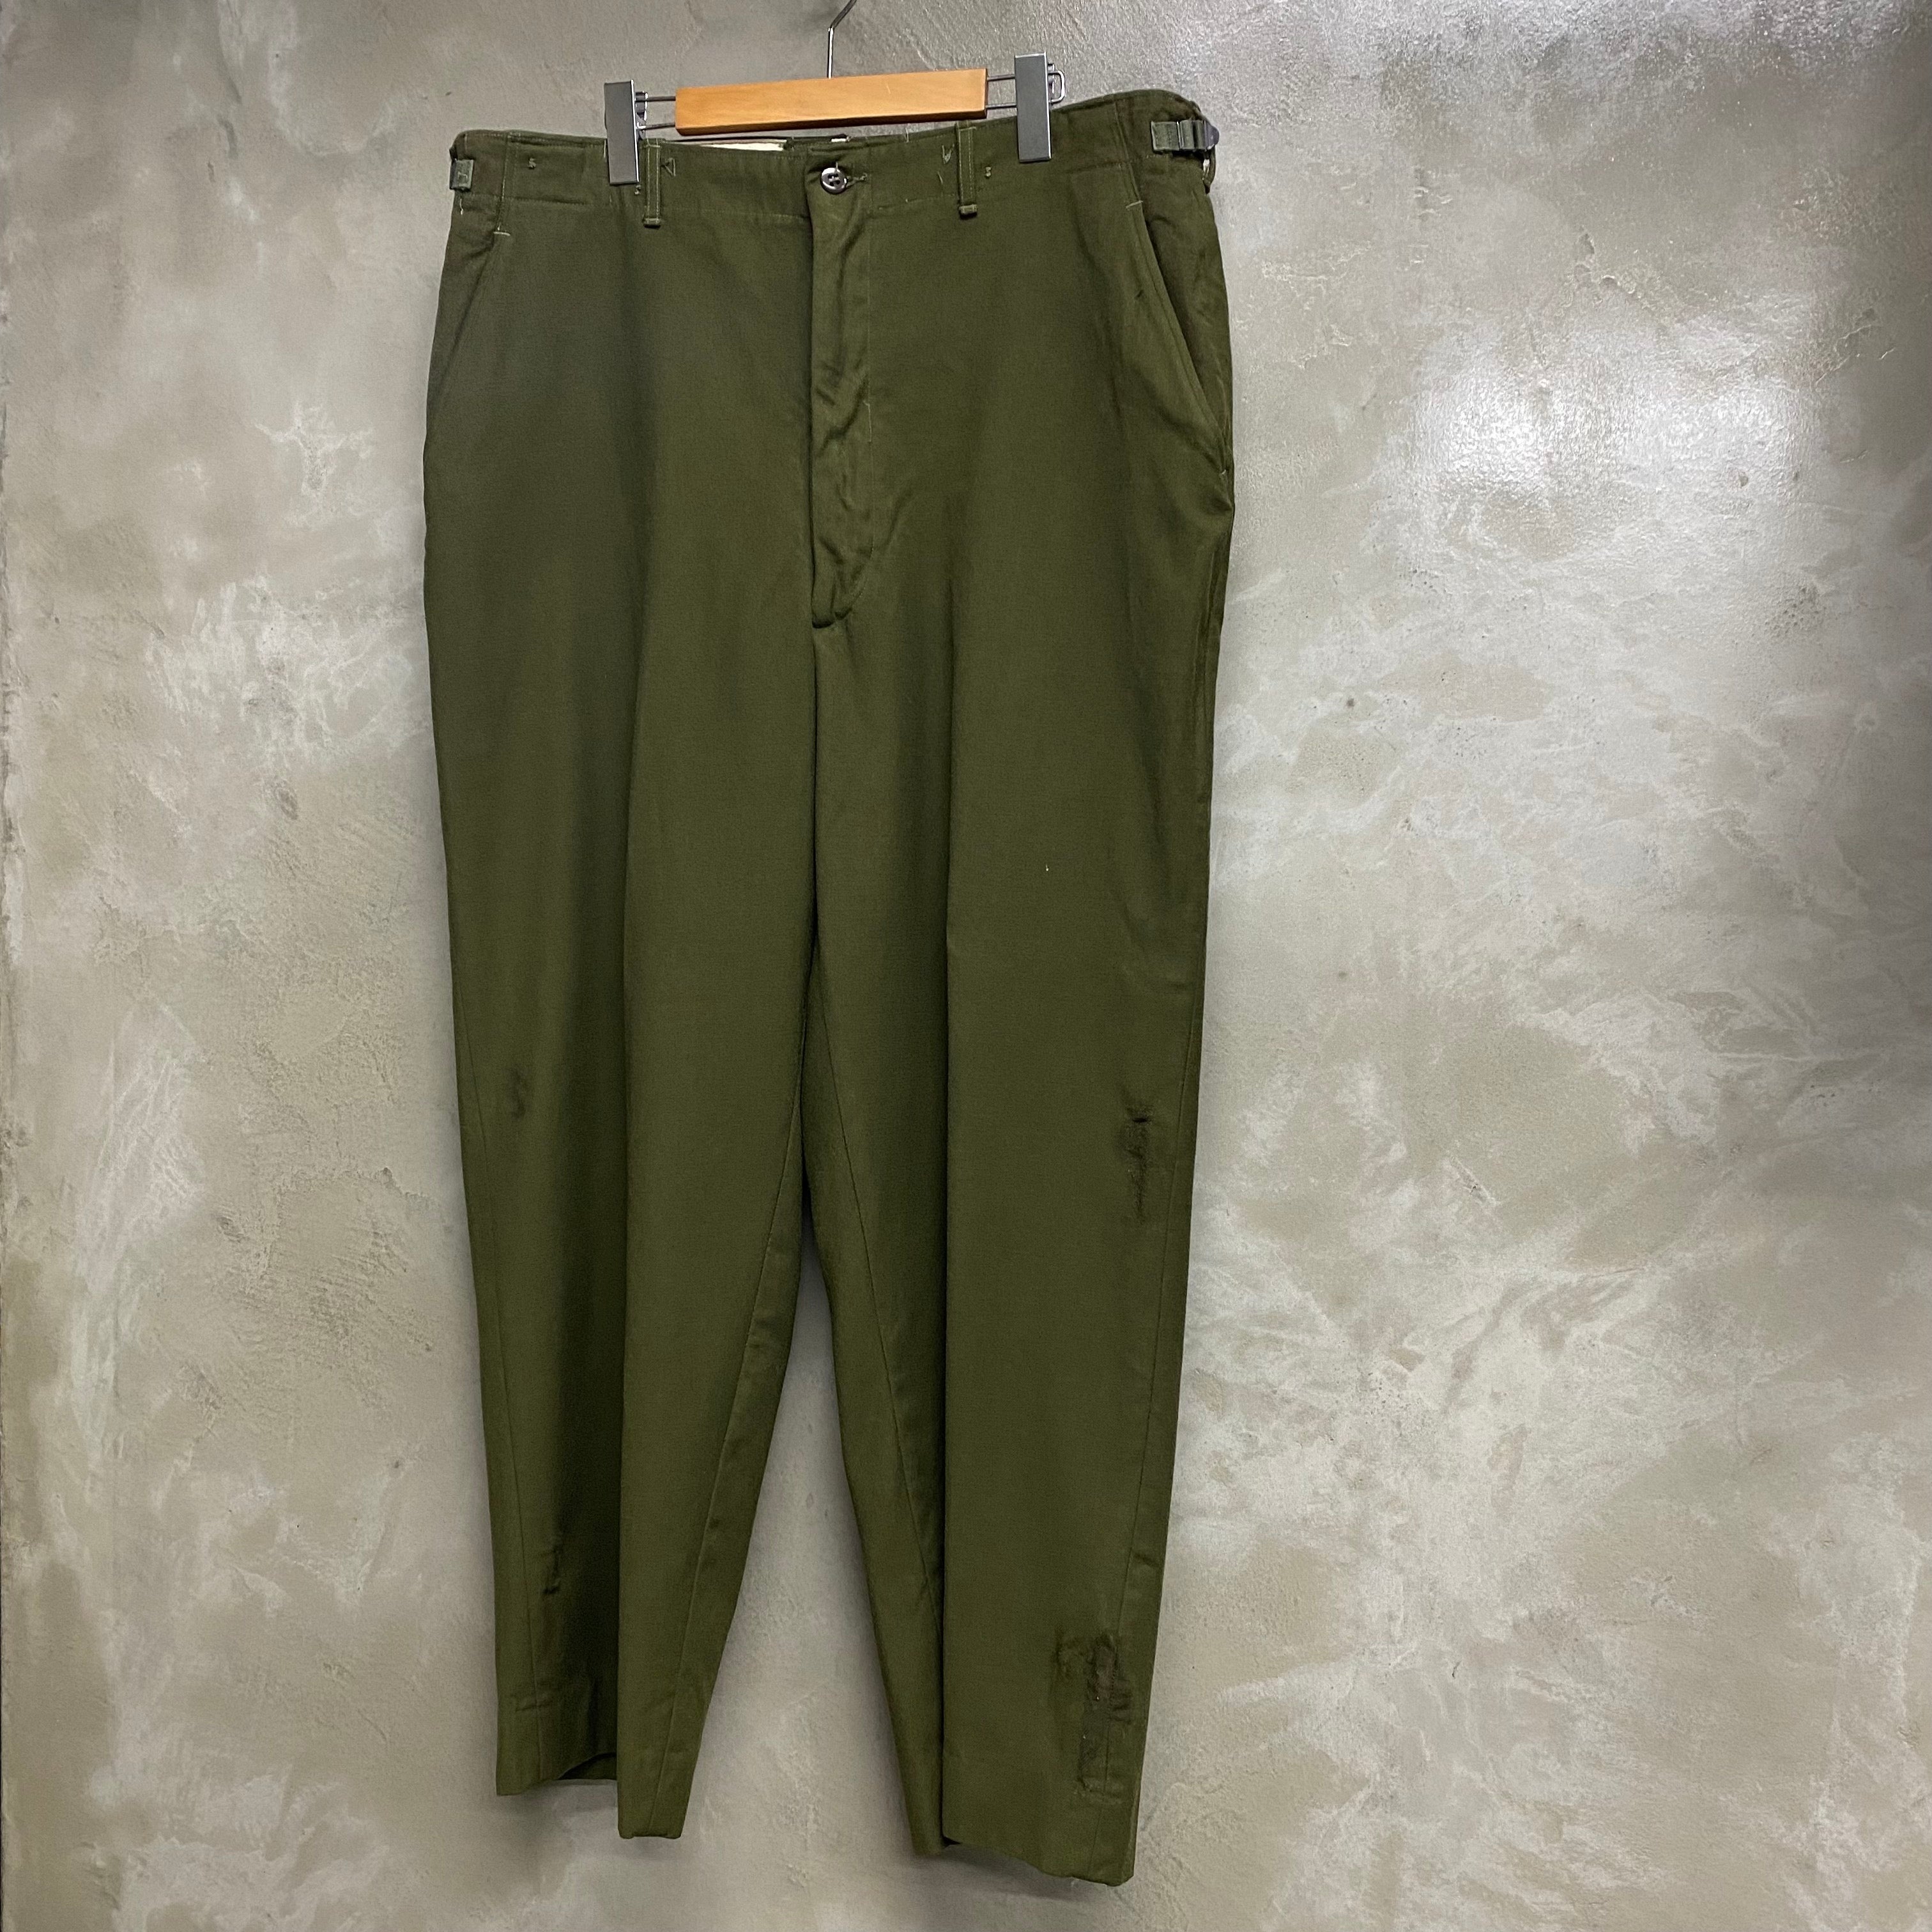 [ ONLY ONE ! ] U.S.ARMY M-51 FIELD TROUSERS / U.S.MILITARY